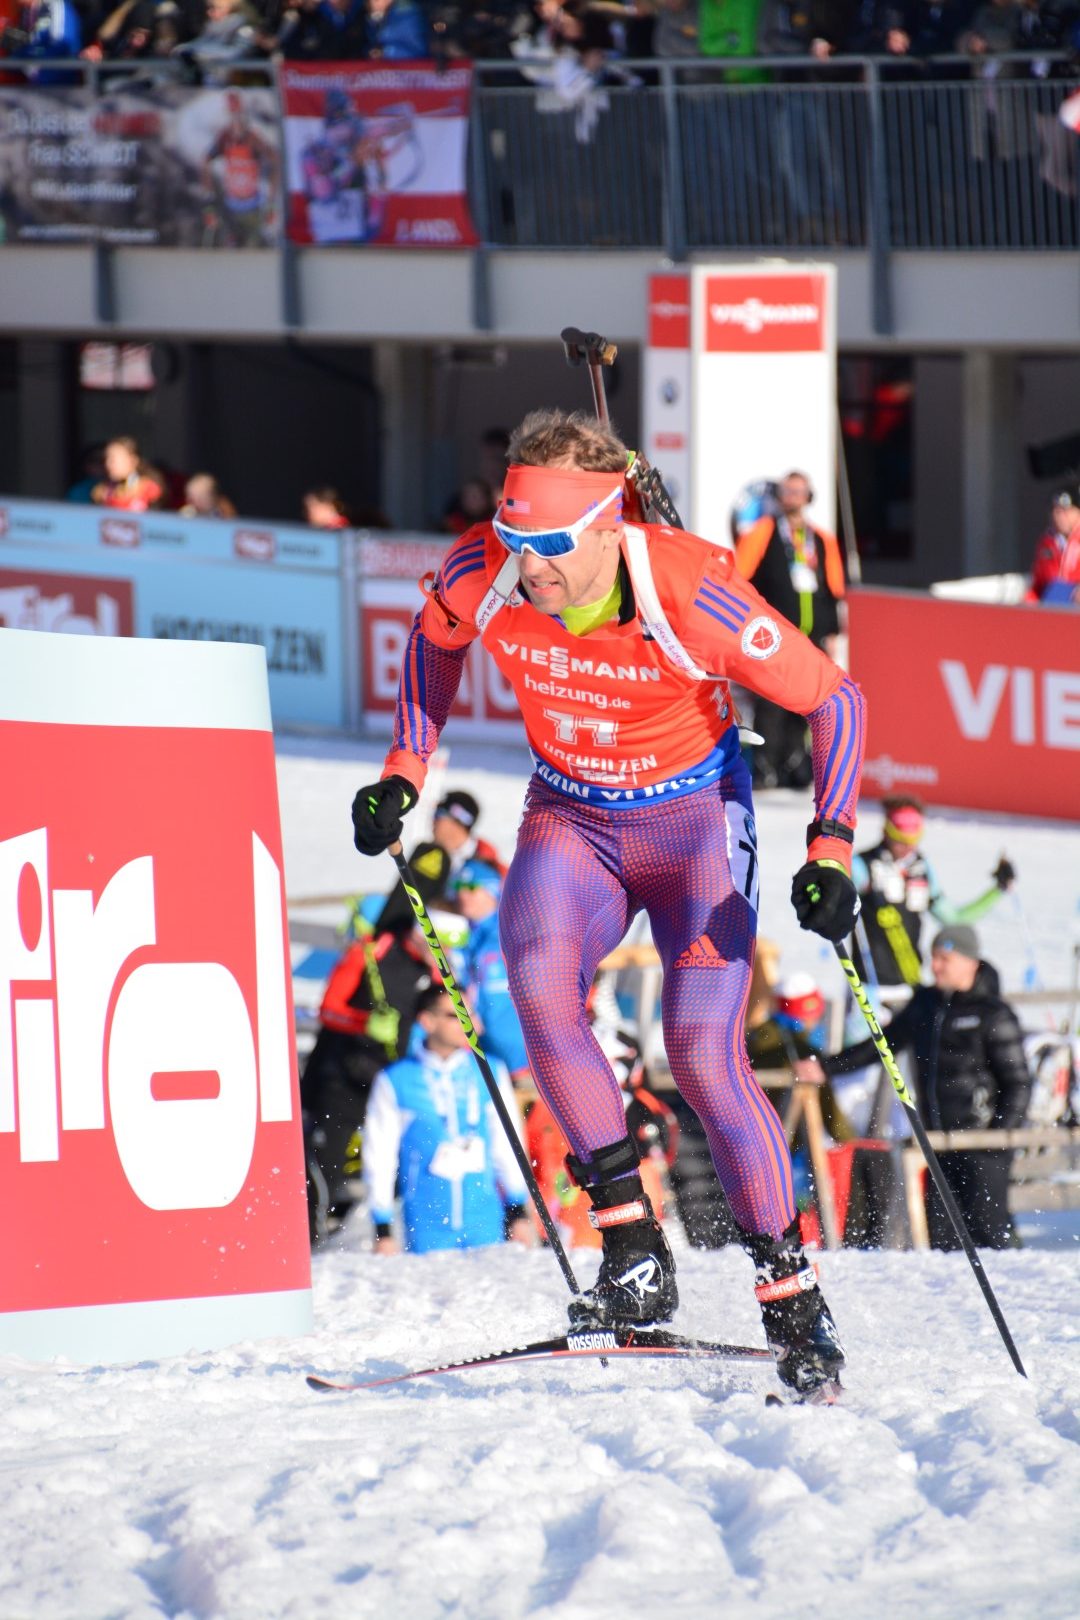 Bailey Fourth in World Championships Sprint, Second-Best Result Ever for American